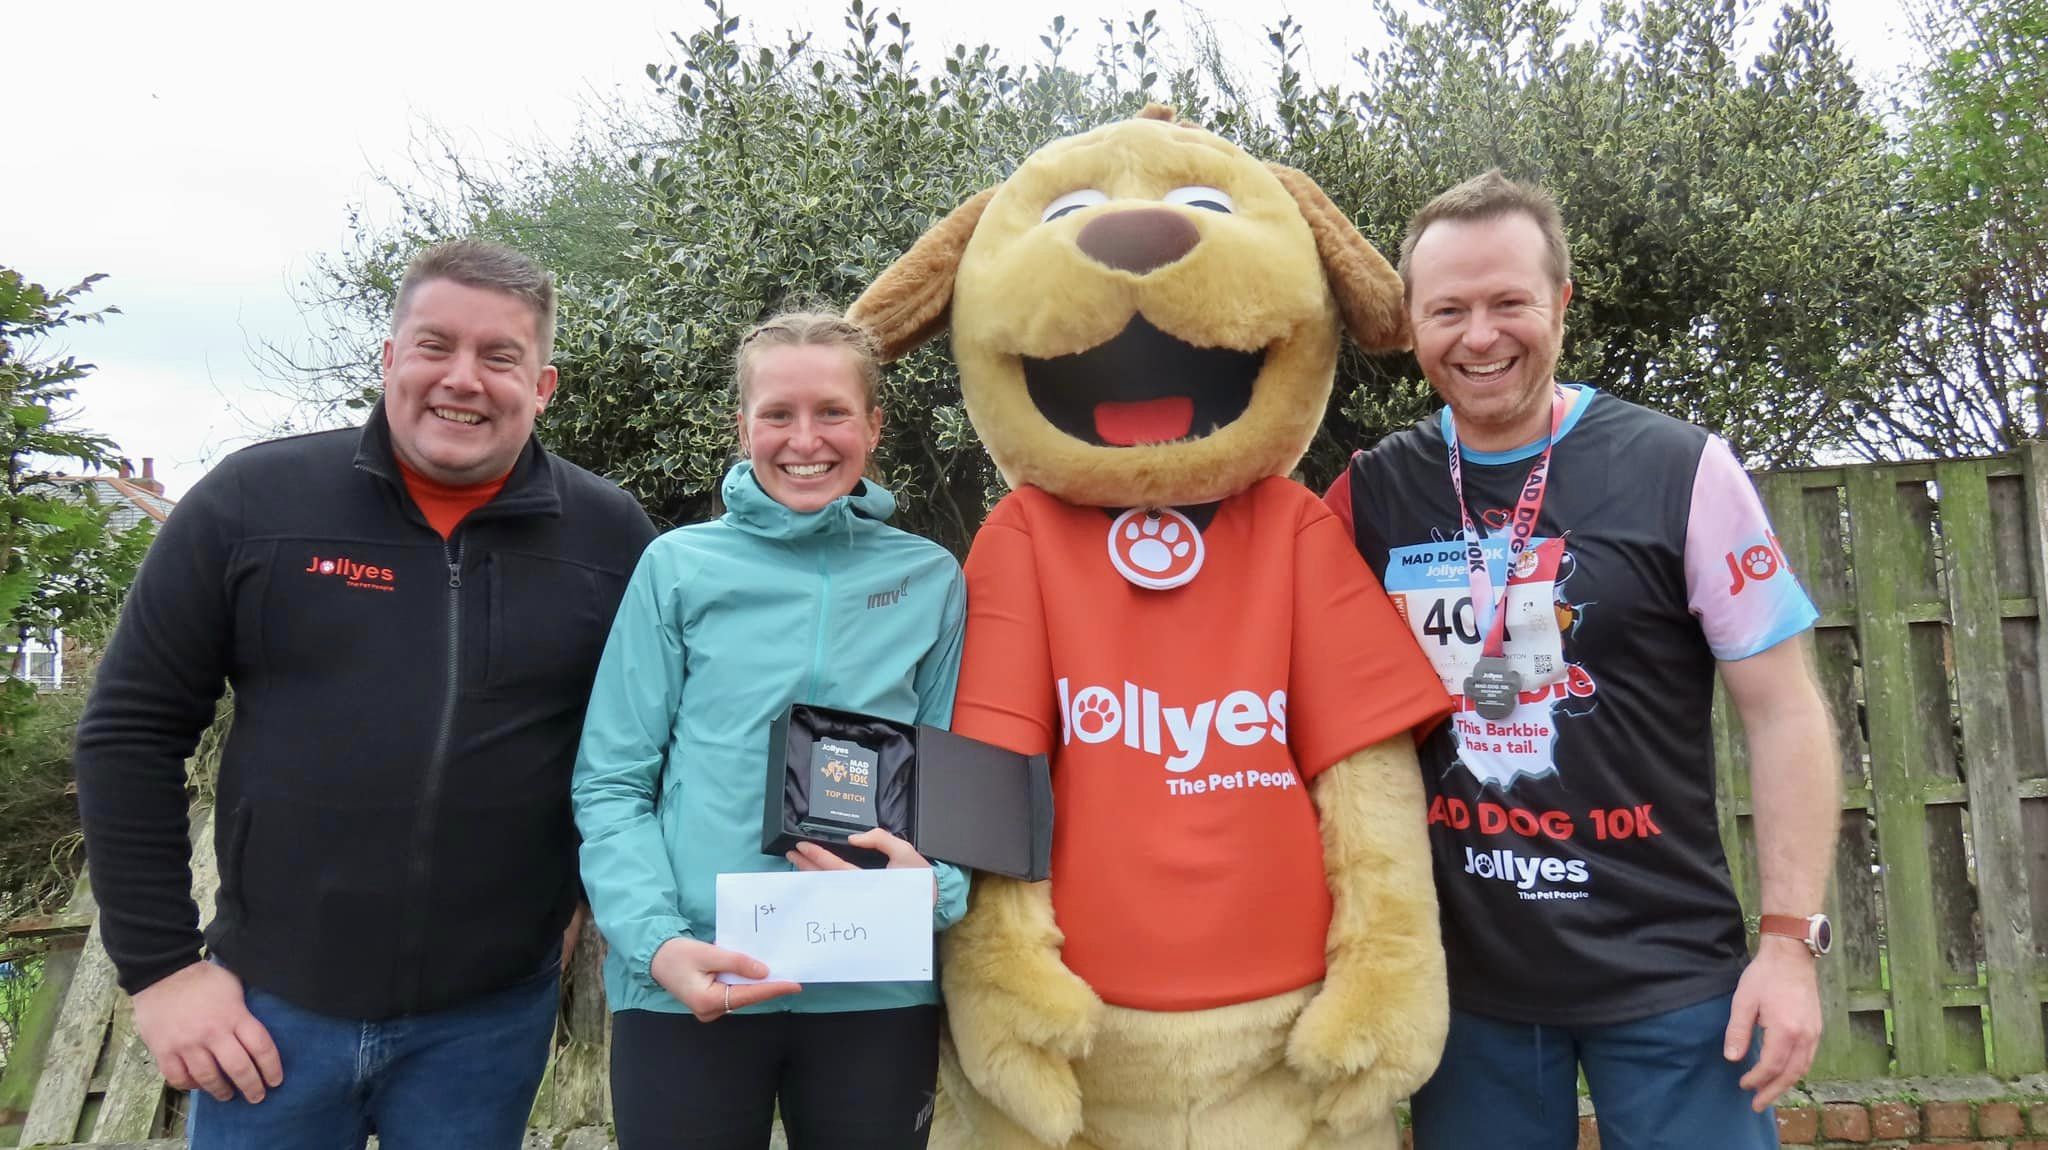 Hundreds of runners enjoyed the Southport Mad Dog 10lk run sponsored by Jollyes - The Pet People. Jollyes head of marketing Phil Turner-Naylor (left); Jollyes CEO Joe Wykes (right); and women's race winner Nicola Jackson 